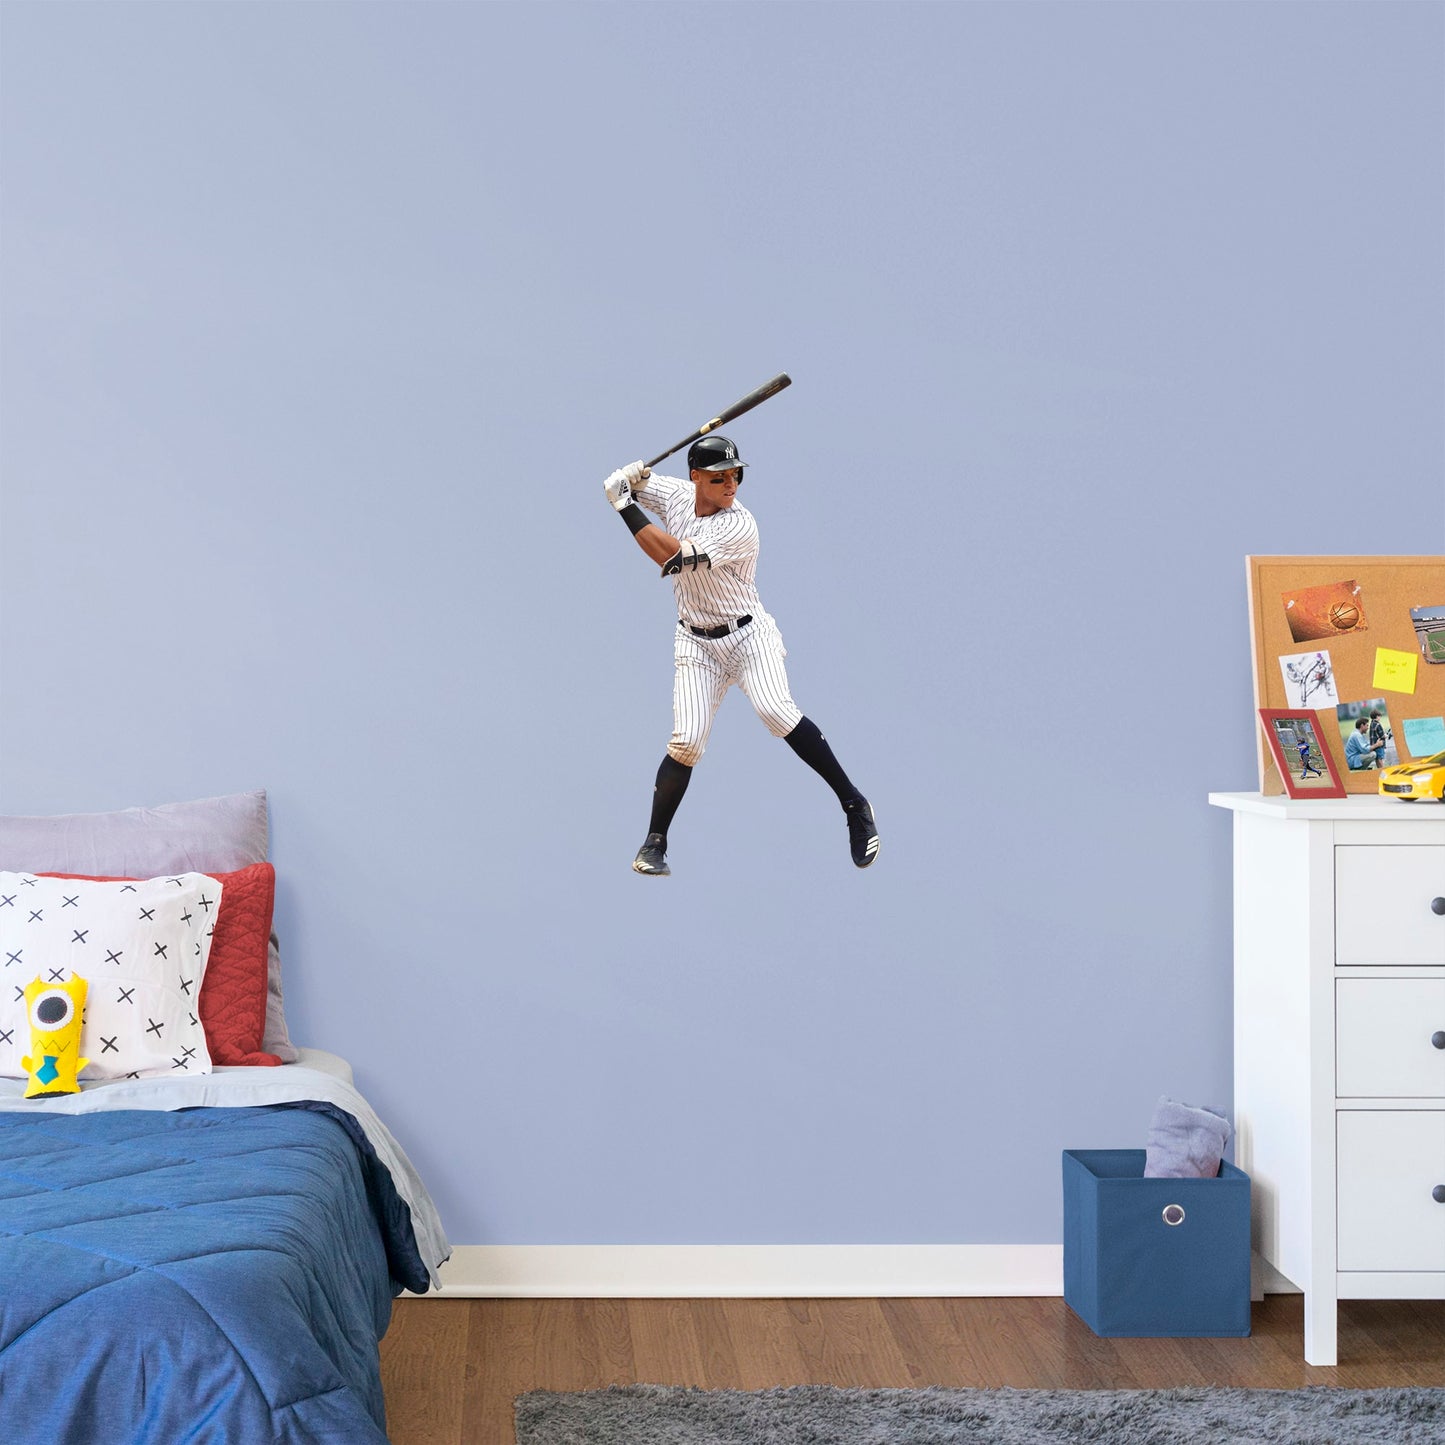 Giant Athlete + 2 Decals (28"W x 51"H) Feed your inner sports fanatic with this unique Aaron Judge wall decal. Perfect for unseasoned Yanks or lifelong season-ticket holders, the reusable image of the 2017 Rookie of the Year pick can be moved from room to room with ease. The verdict is in: this adhesive graphic is perfect die-hard fans of The Judge.